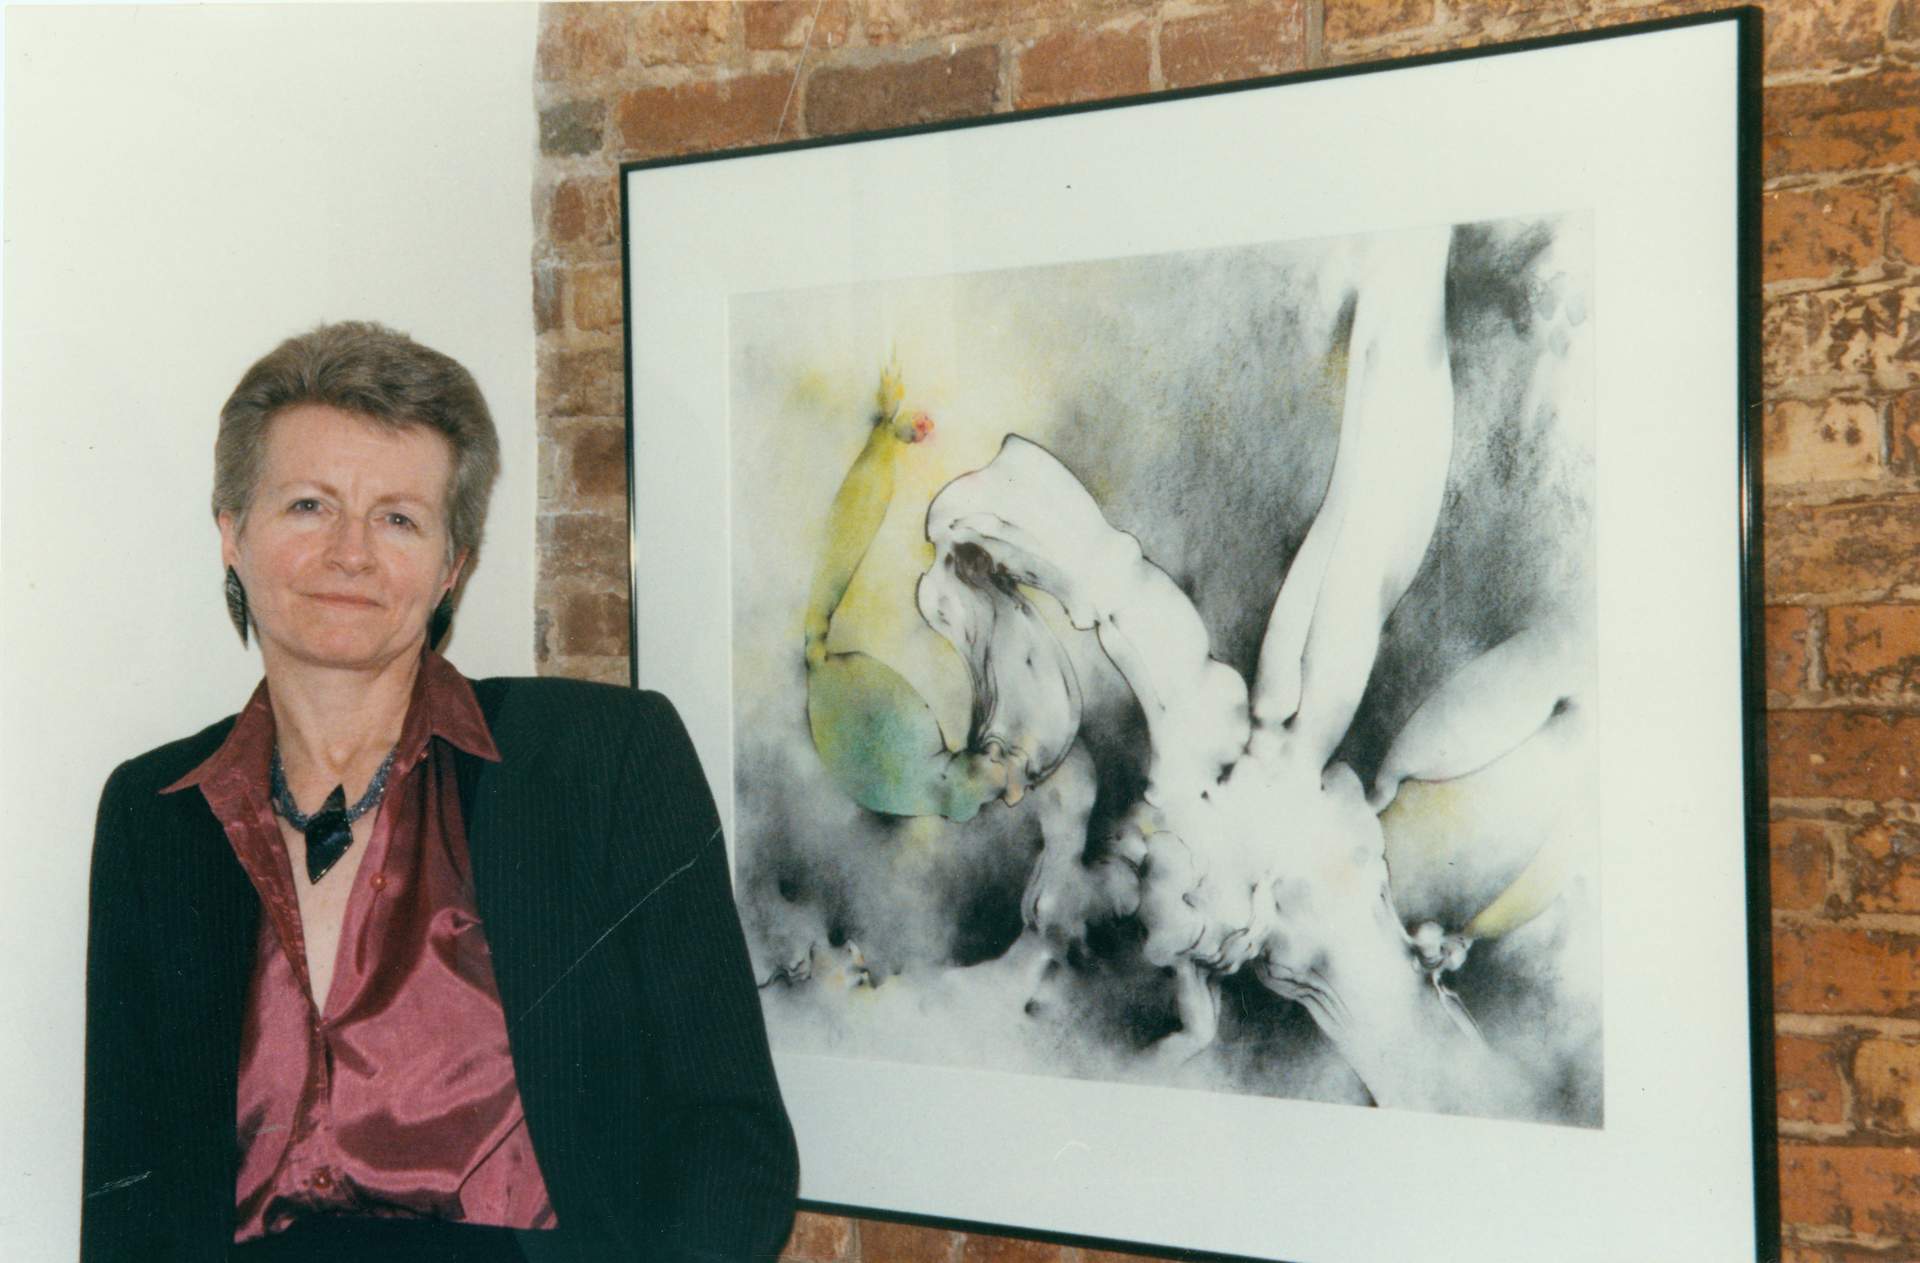 Undated Photograph with Priscilla Bowen and her work (title unknown)